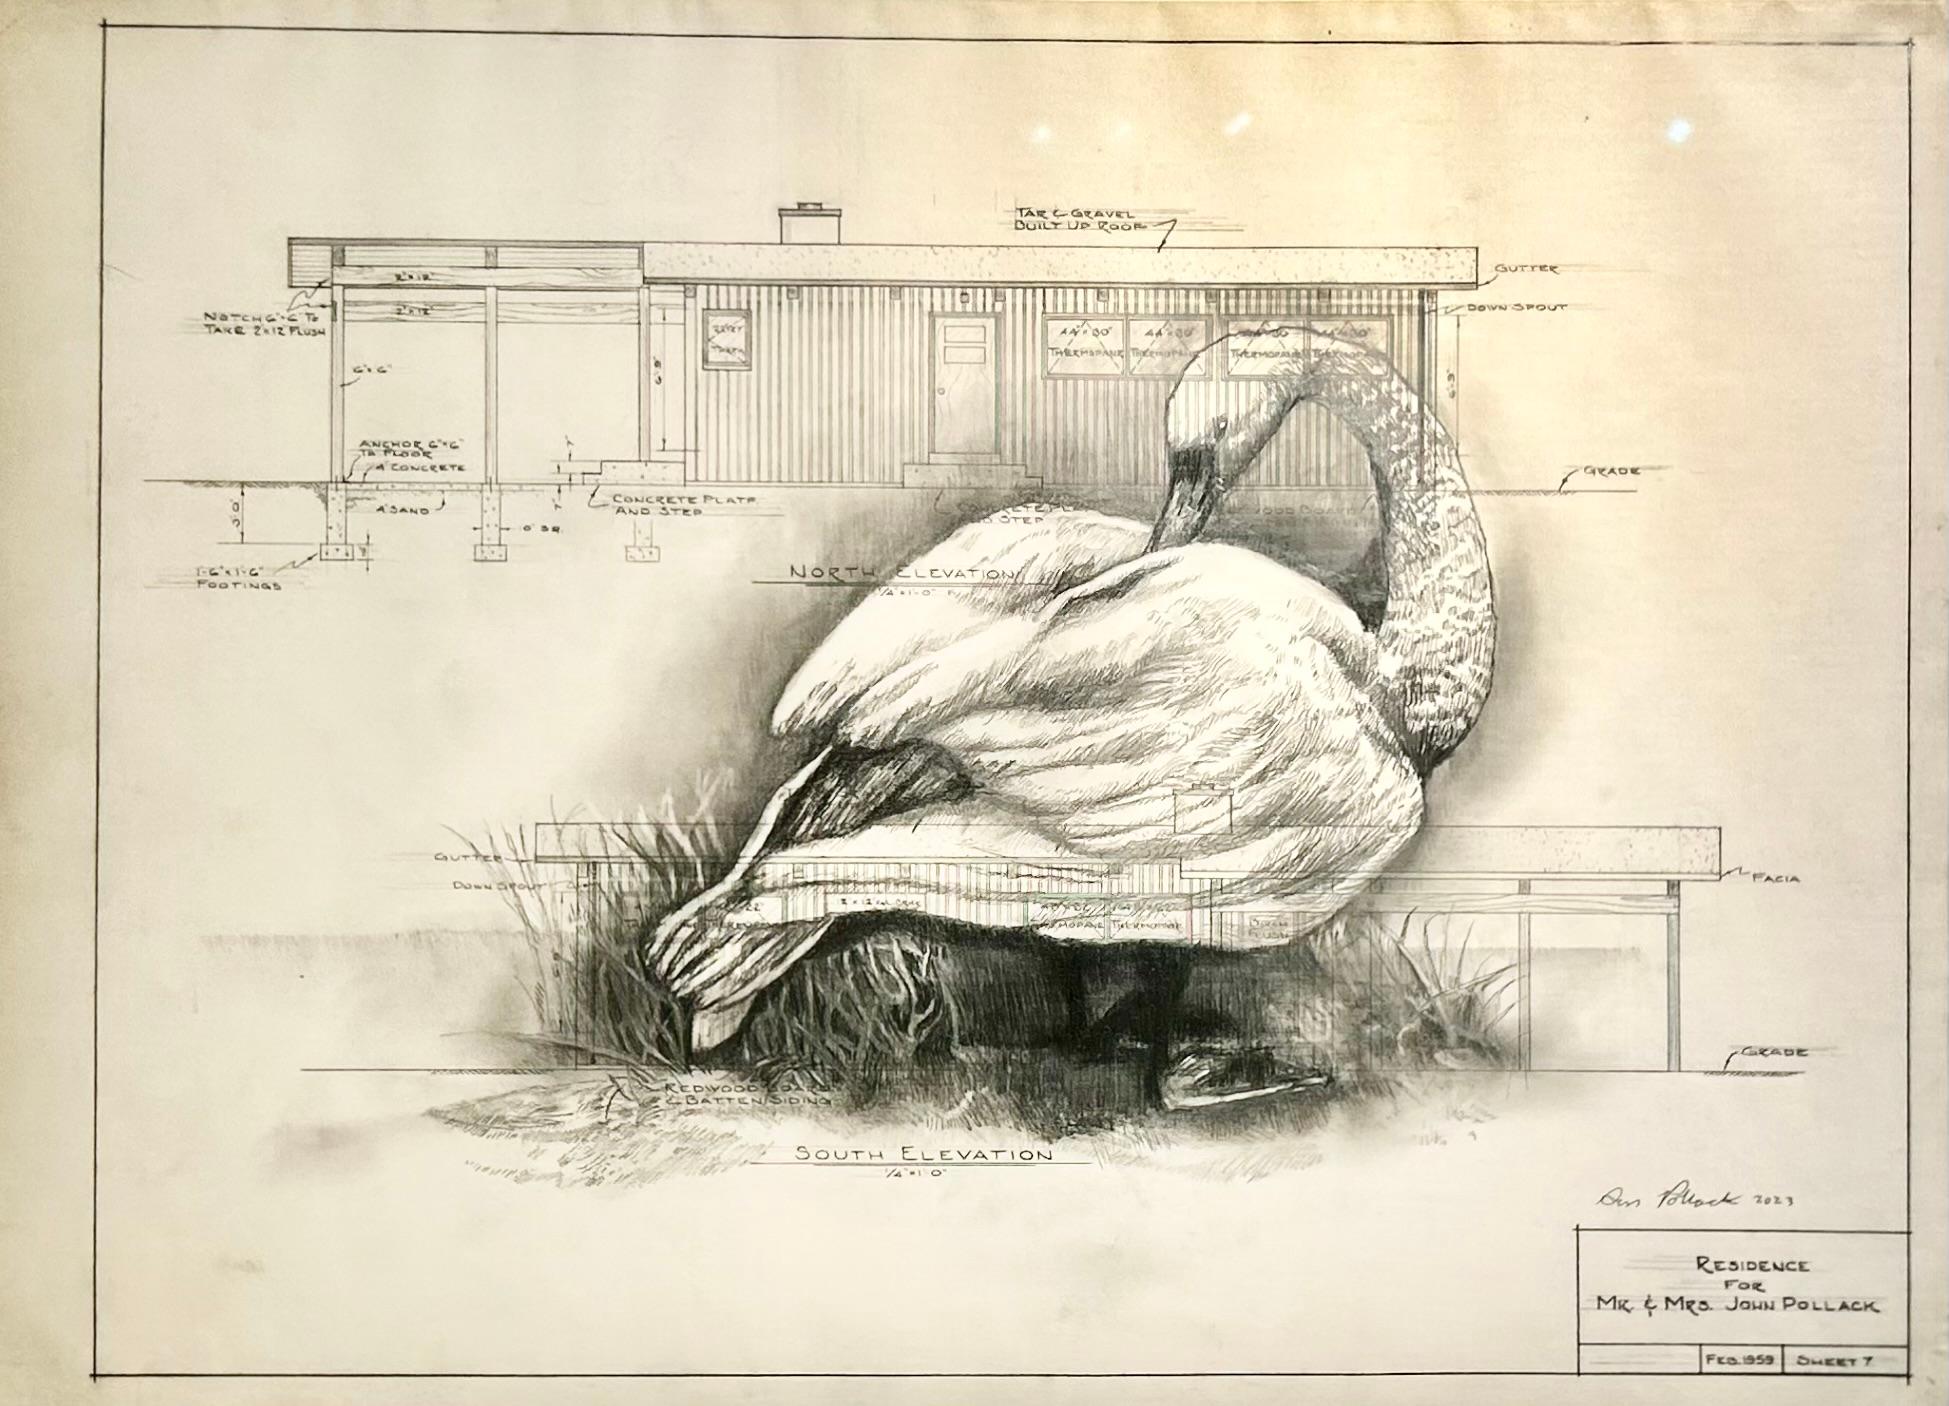 Don Pollack Animal Art - Transformed - Swan in Graphite on Antique Architectural Drawings 